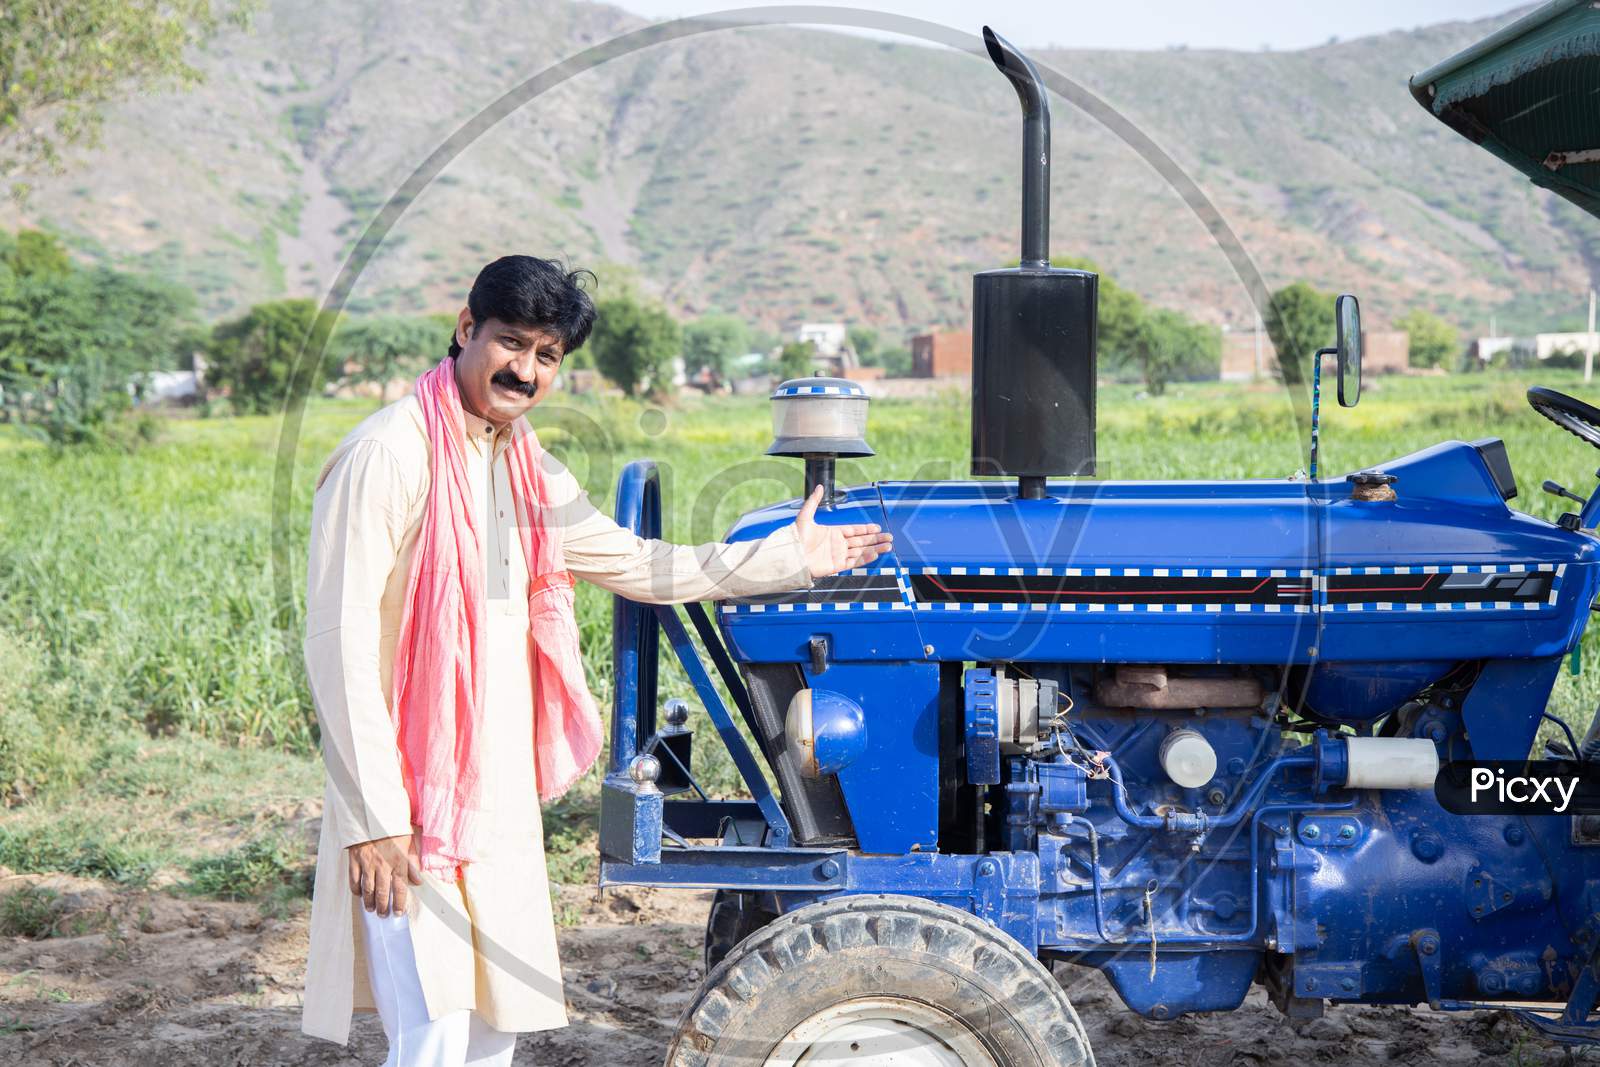 Young Happy Indian Farmer Showing His Blue Tractor Standing At Agriculture Field. Man Wearing Traditional Kurta With Mustache Smiling Looking At Camera. Rural India Concept.